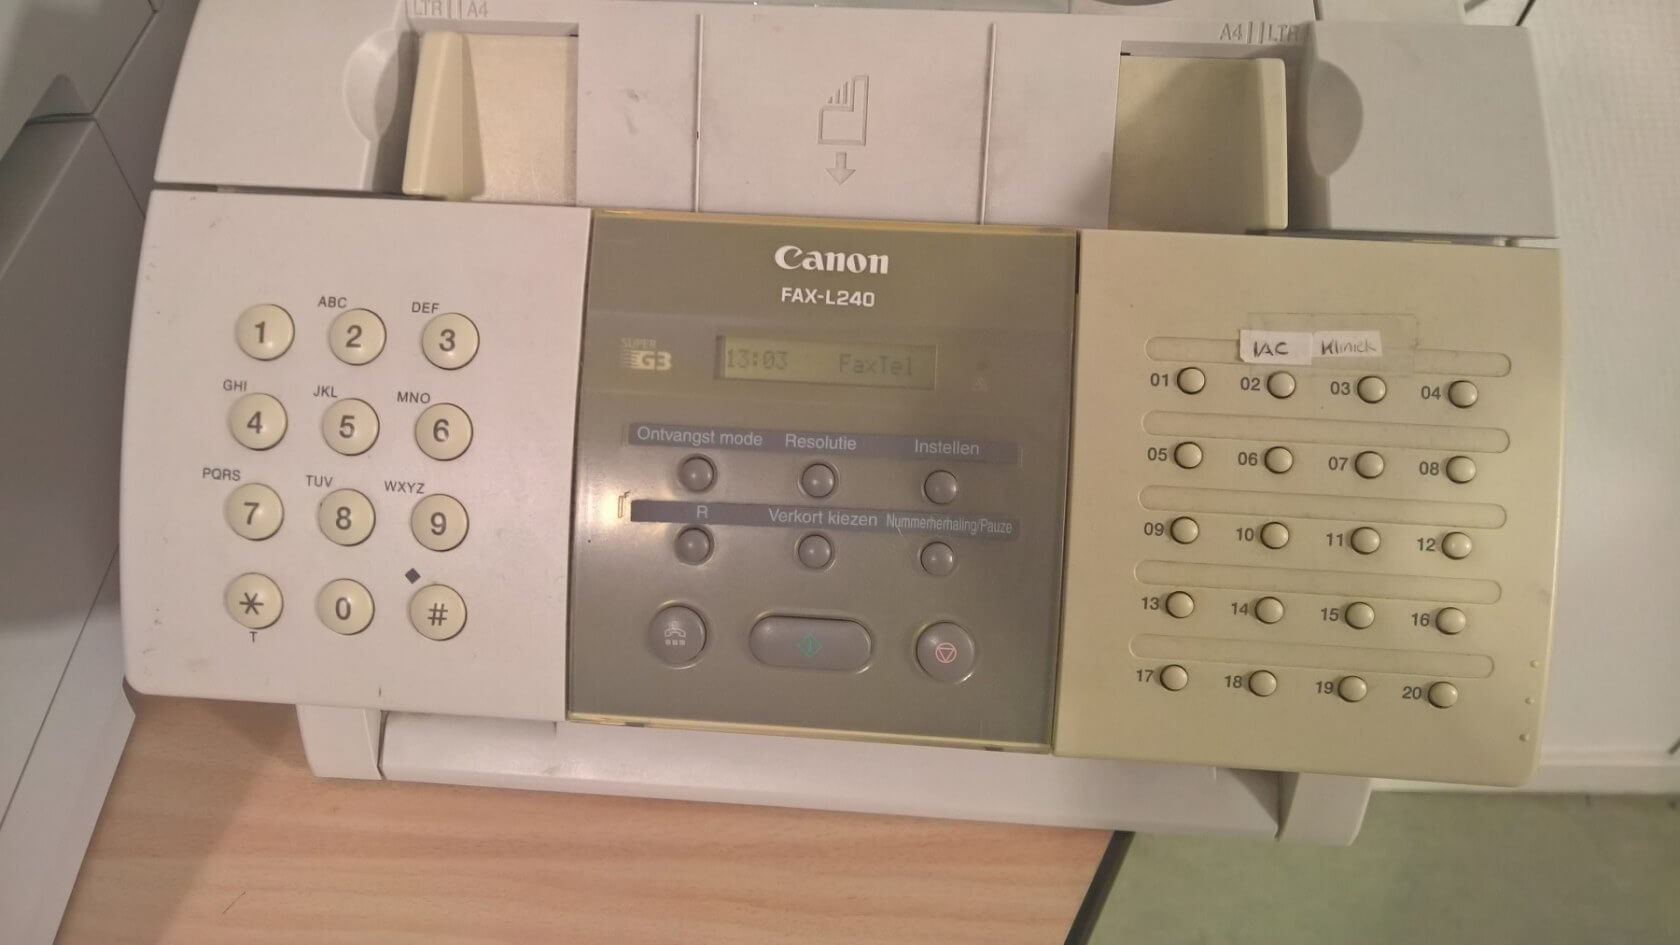 UK's national health service still relies on fax machines